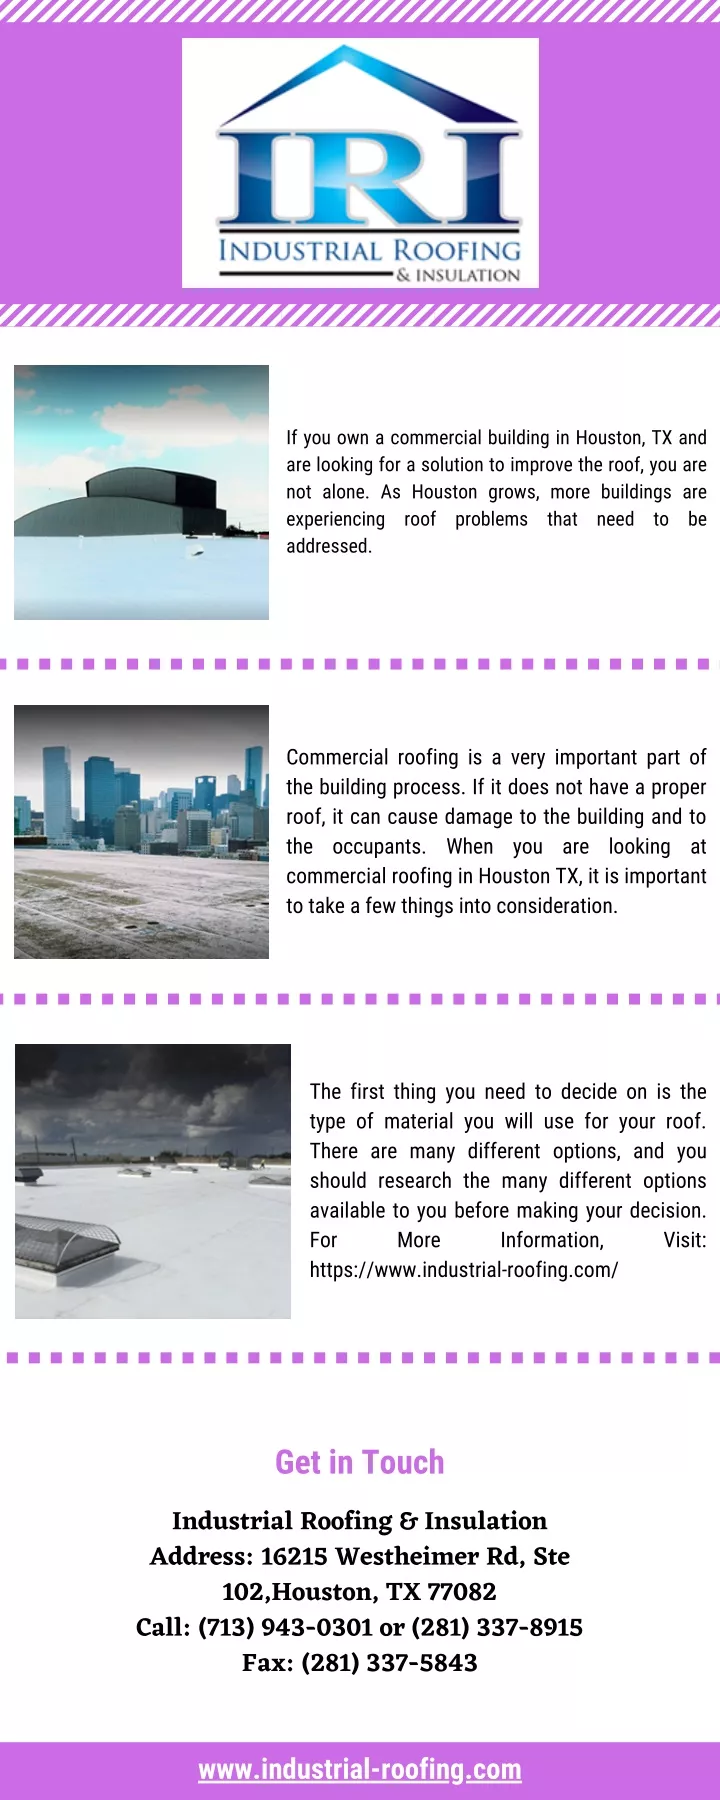 if you own a commercial building in houston